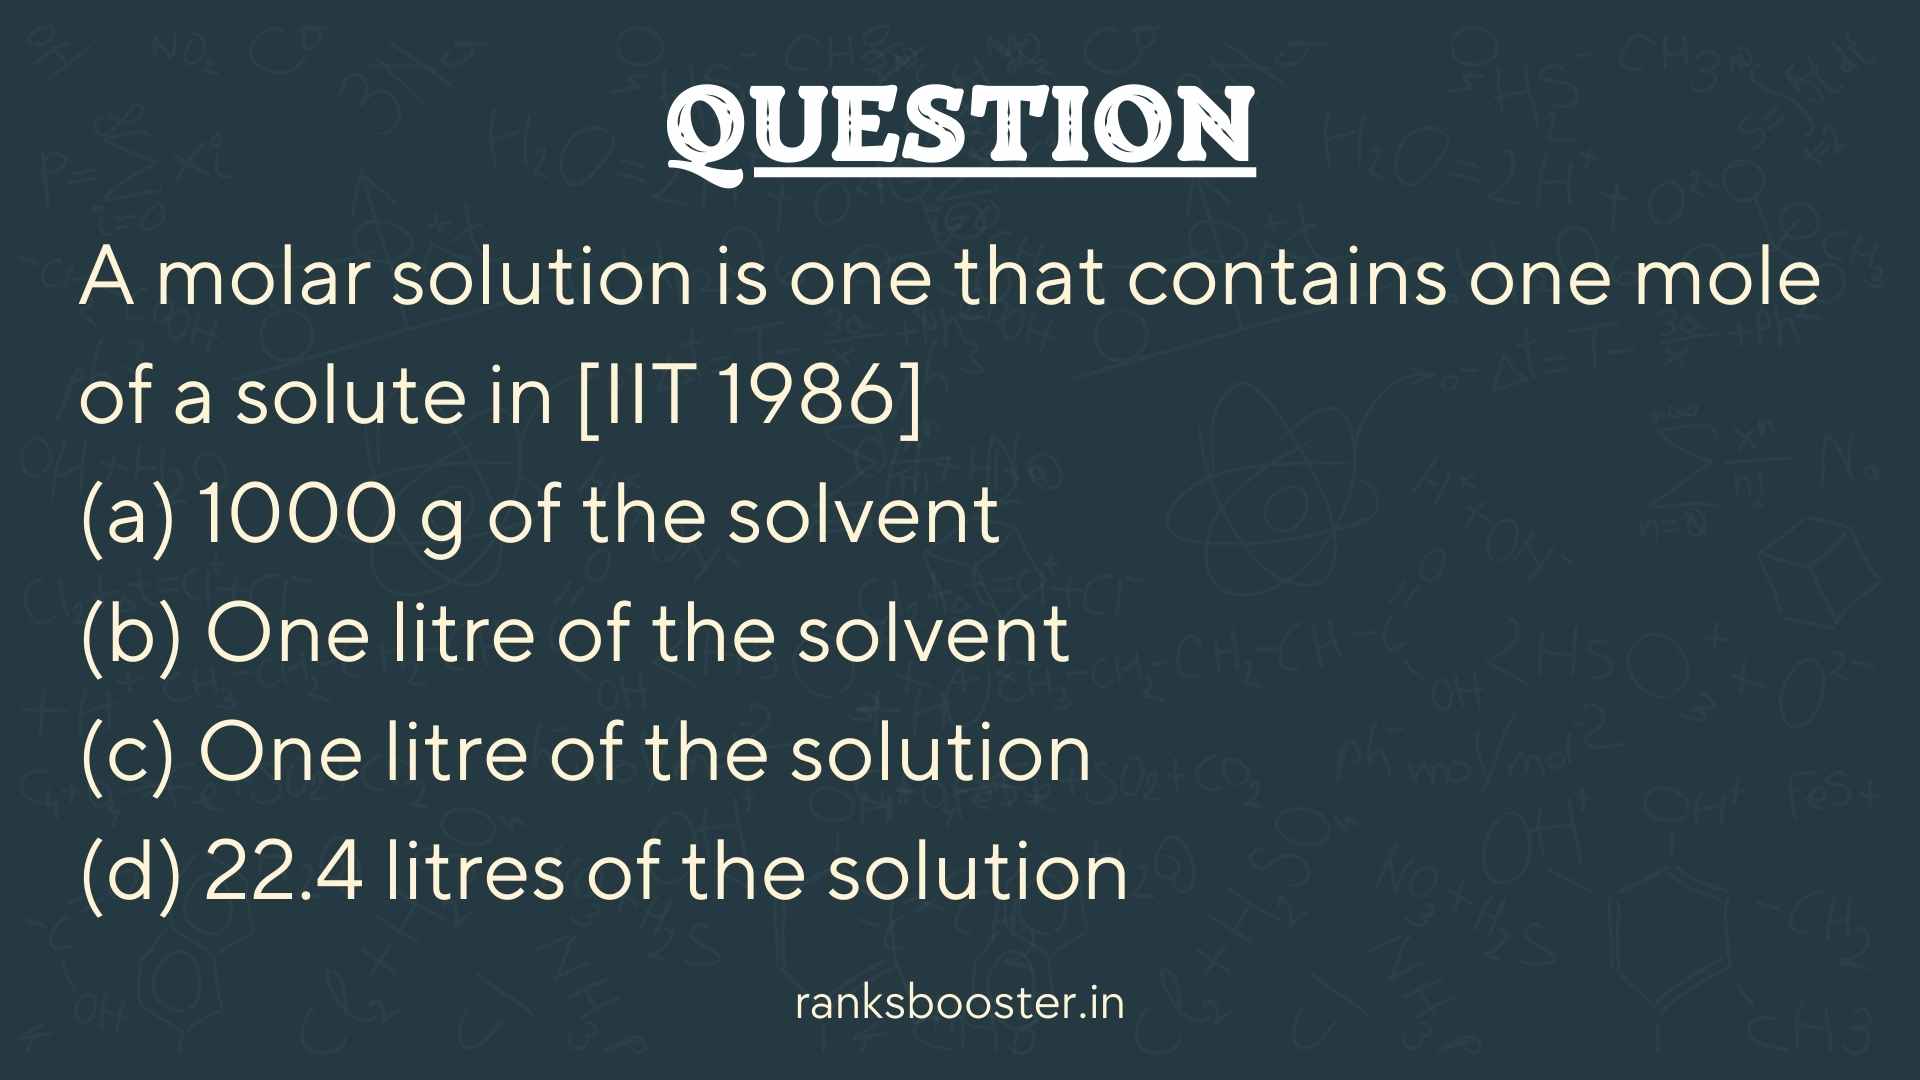 A molar solution is one that contains one mole of a solute in [IIT 1986] (a) 1000 g of the solvent (b) One litre of the solvent (c) One litre of the solution (d) 22.4 litres of the solution